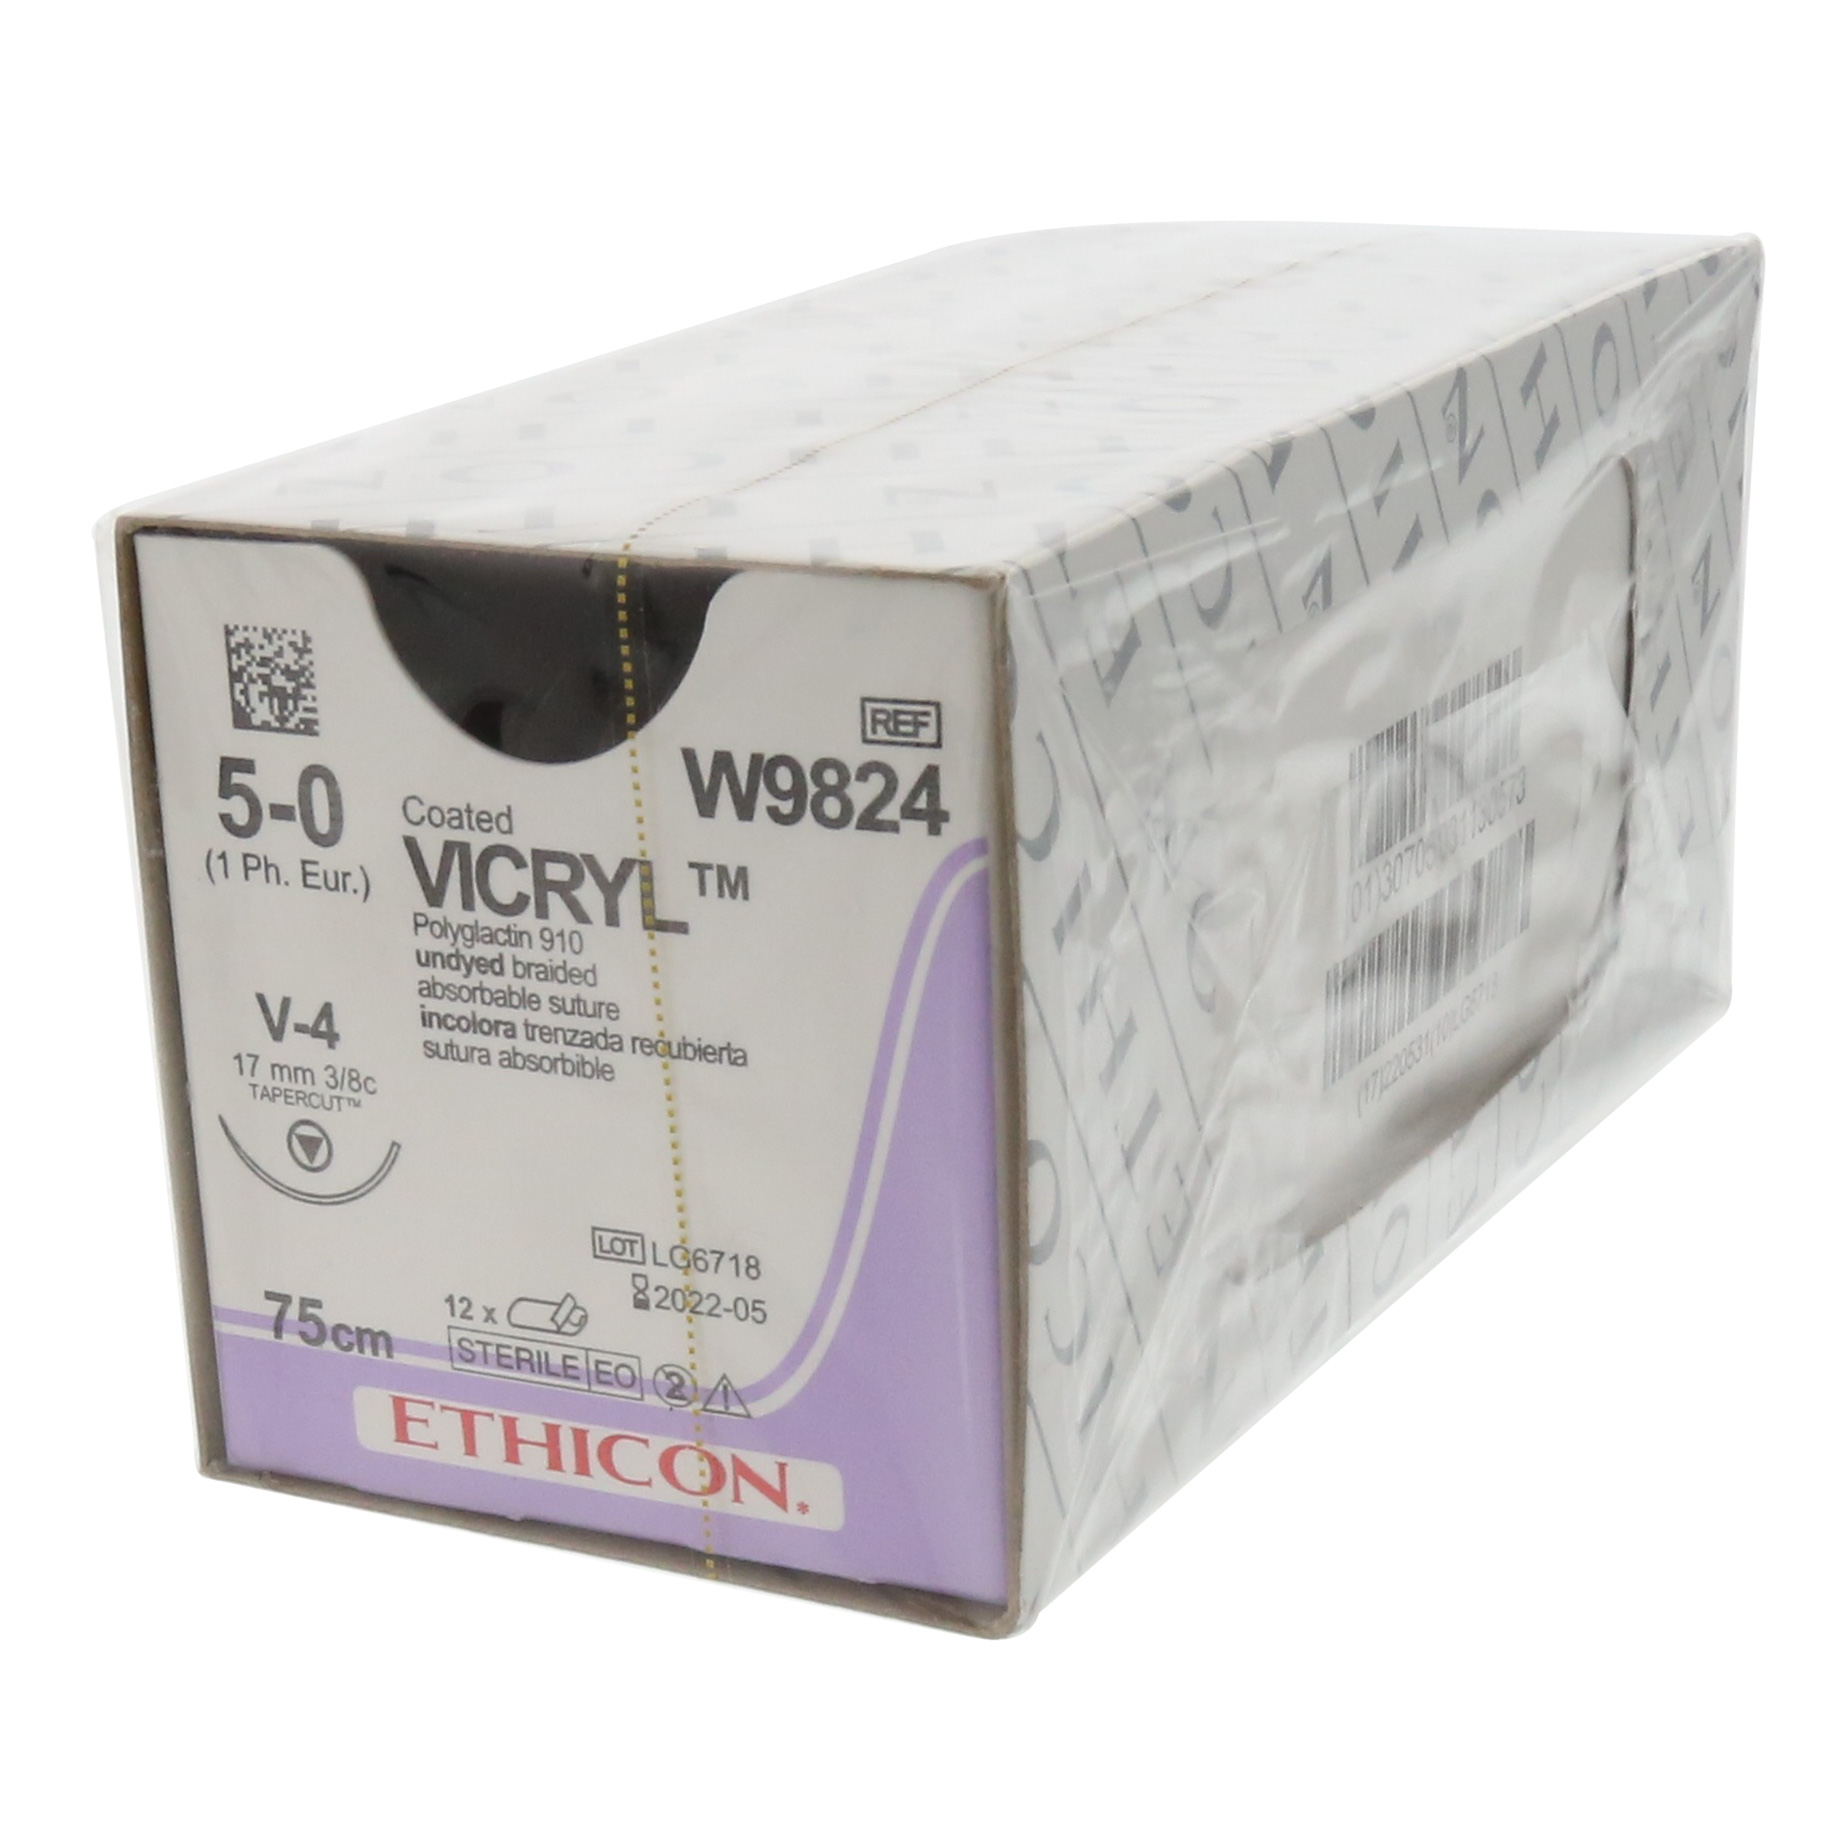 VICRYL SUTURE UNDYED BRAIDED ABSORBABLE